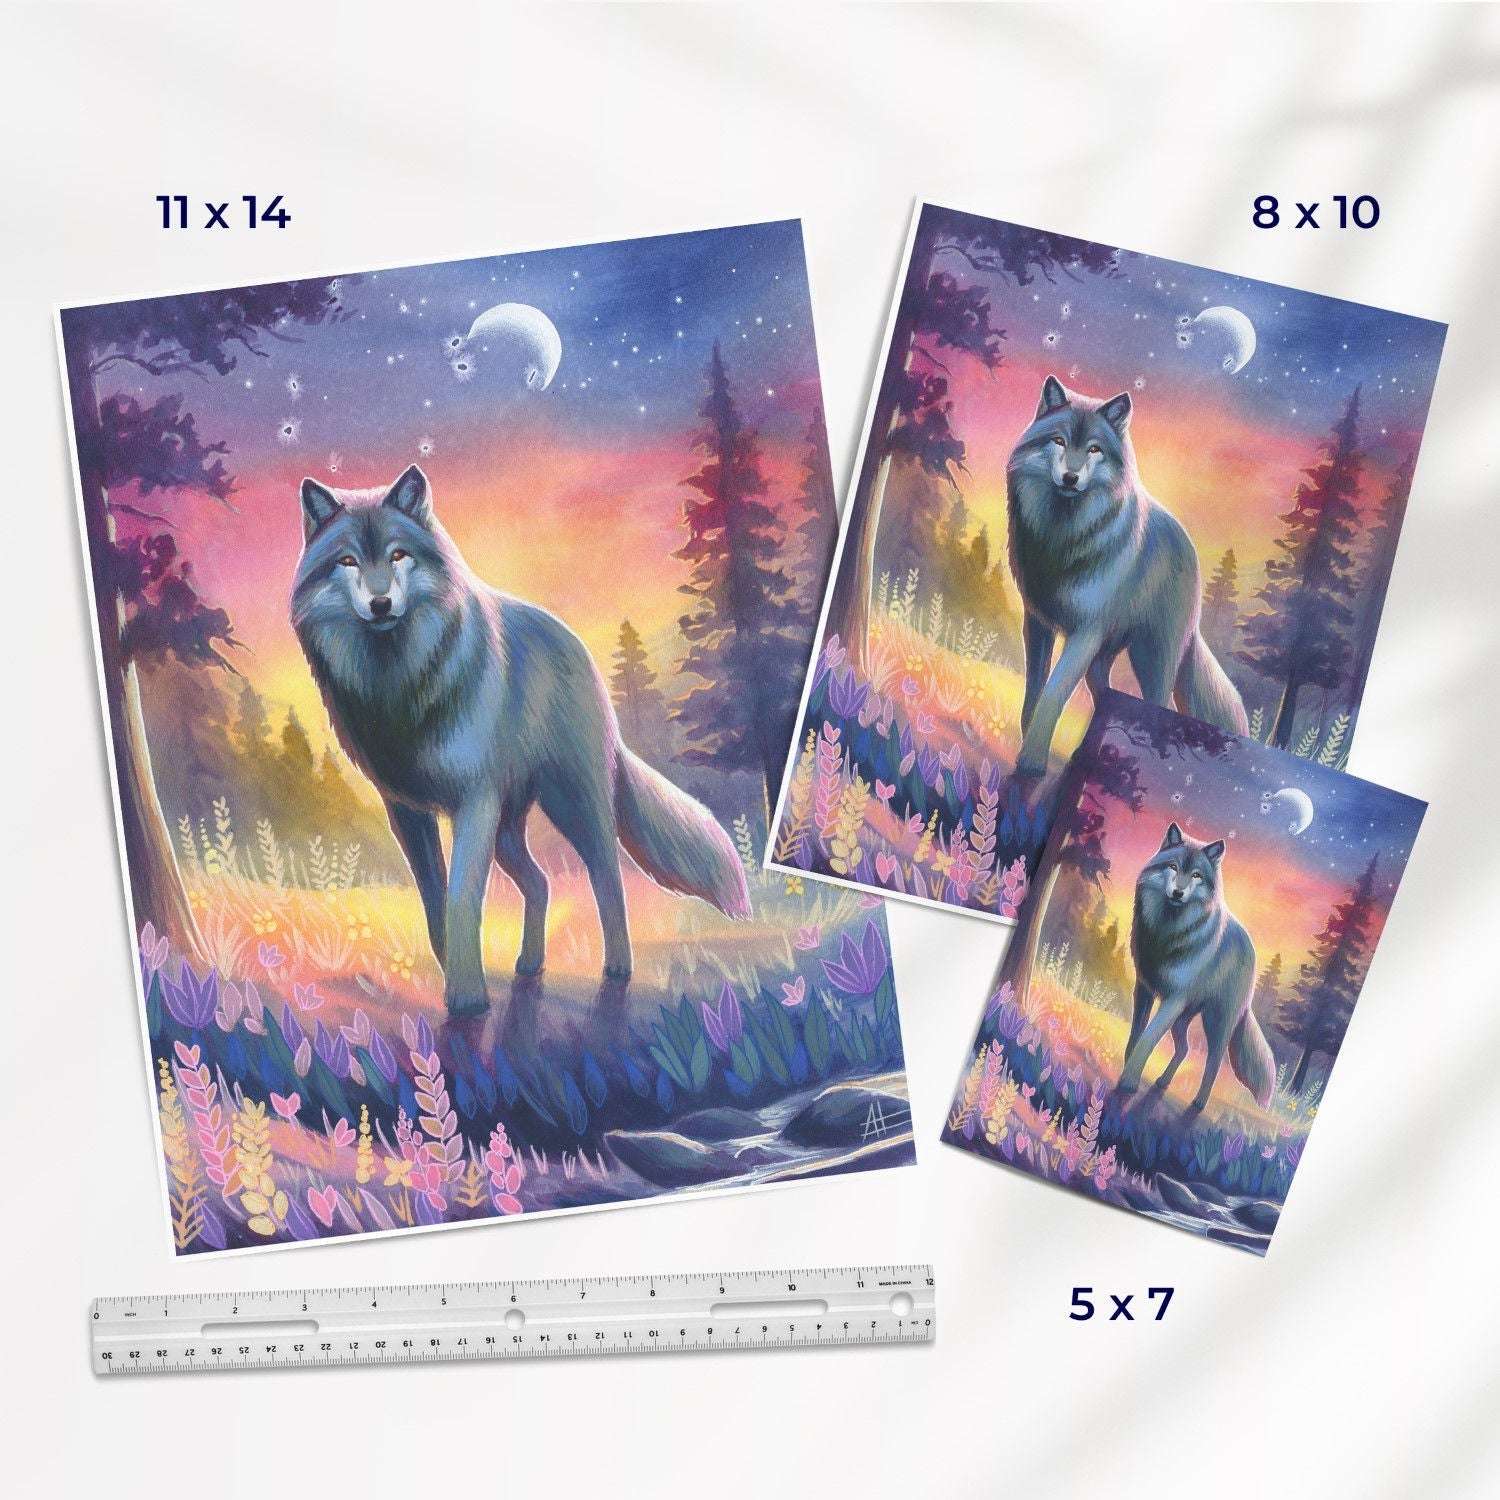 Three different sizes of a Twilight Watch - Fine Art Print Bundle depicting a wolf standing in a vibrant, colorful forest under a crescent moon. a ruler is shown for scale.